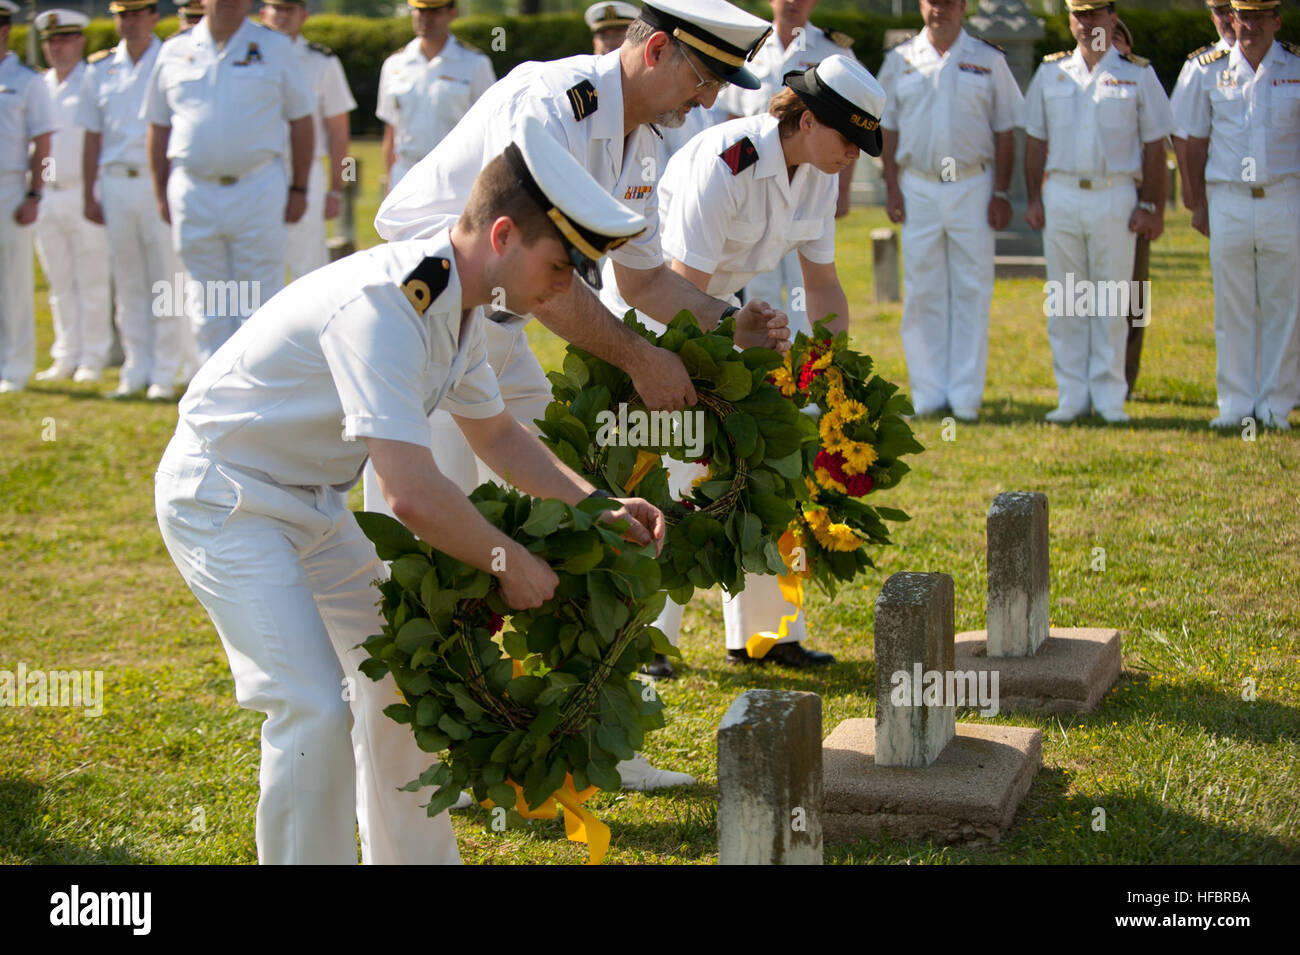 PORTSMOUTH, Va. (April 17, 2012) Spanish navy sailors lay wreaths during a ceremony at Captain Ted Conaway Memorial Naval Cemetery. The wreath laying was in remembrance of three Spanish prisoners of war who died in Portsmouth Naval Hospital during the Spanish-American War. (U.S. Navy photo by Mass Communication Specialist 2nd Class William Jamieson/Released) 120417-N-OV802-058 Join the conversation http://www.facebook.com/USNavy http://www.twitter.com/USNavy http://navylive.dodlive.mil  - Official U.S. Navy Imagery - Spanish navy sailors lay wreaths. Stock Photo